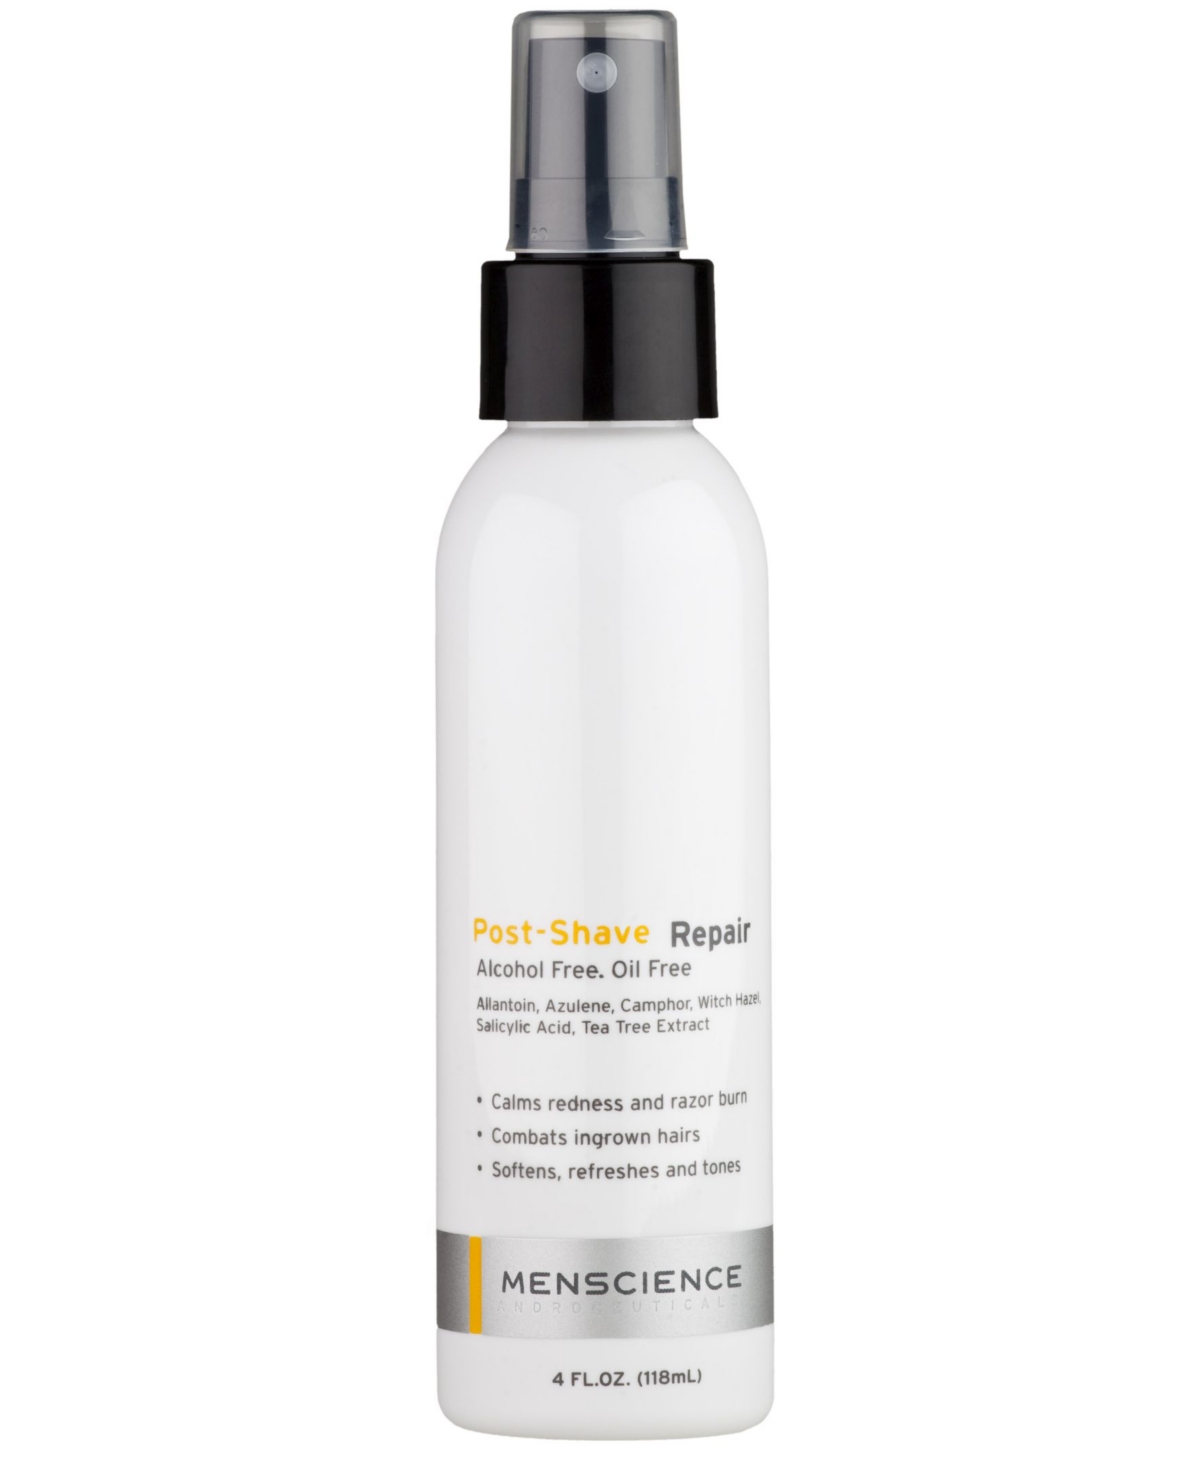 Post-Shave Repair Aftershave Spray For Men, 4 oz.